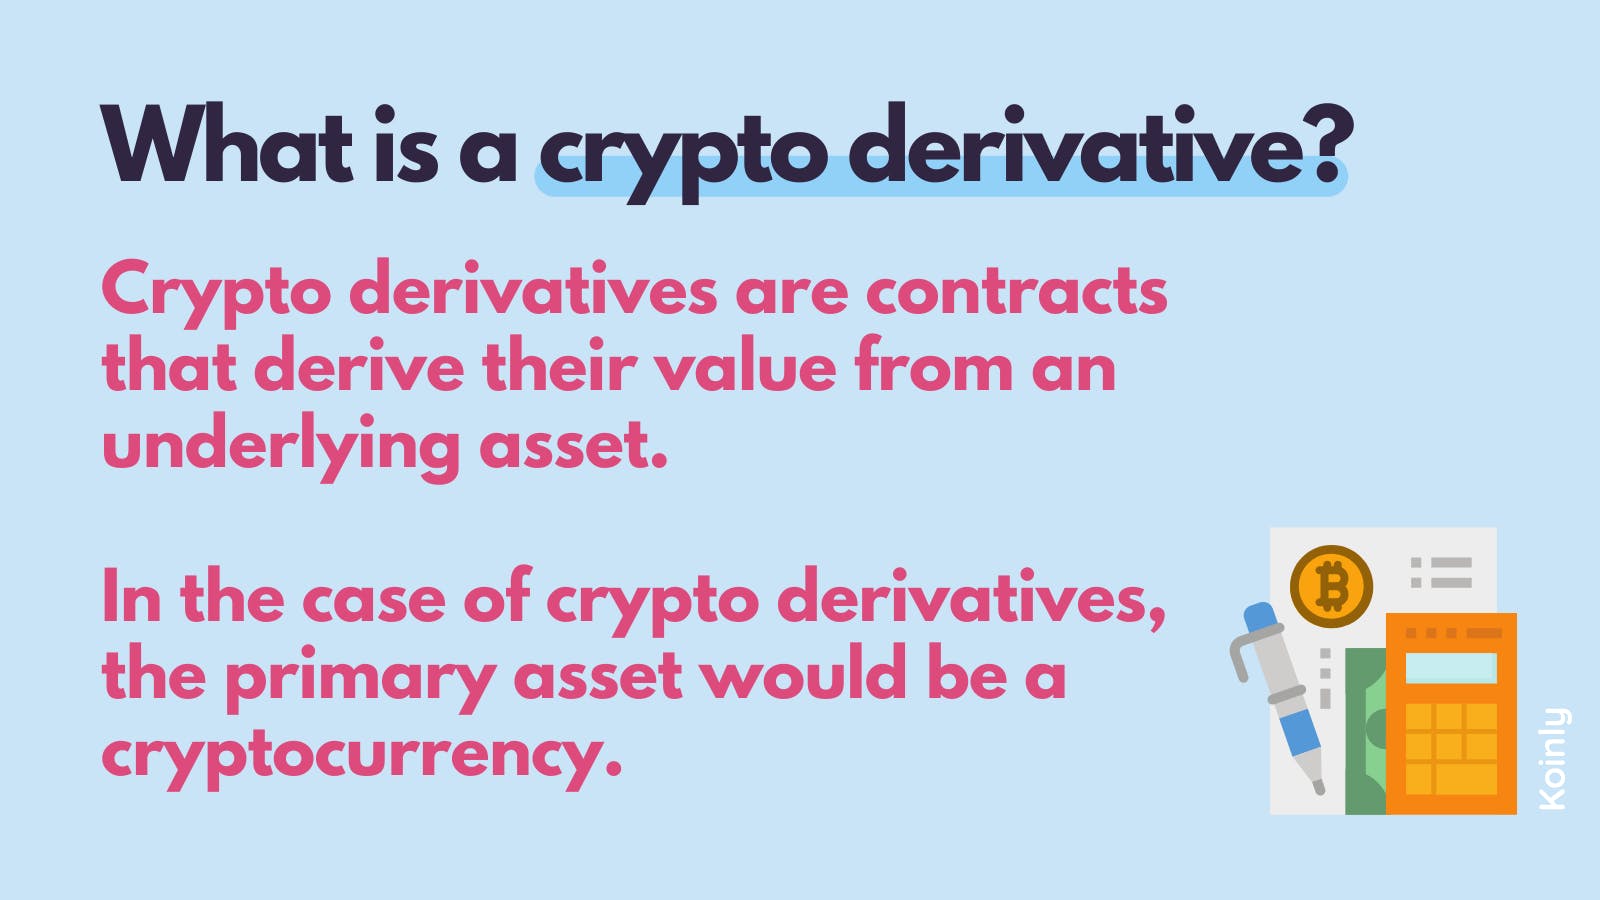 What is a crypto derivative?